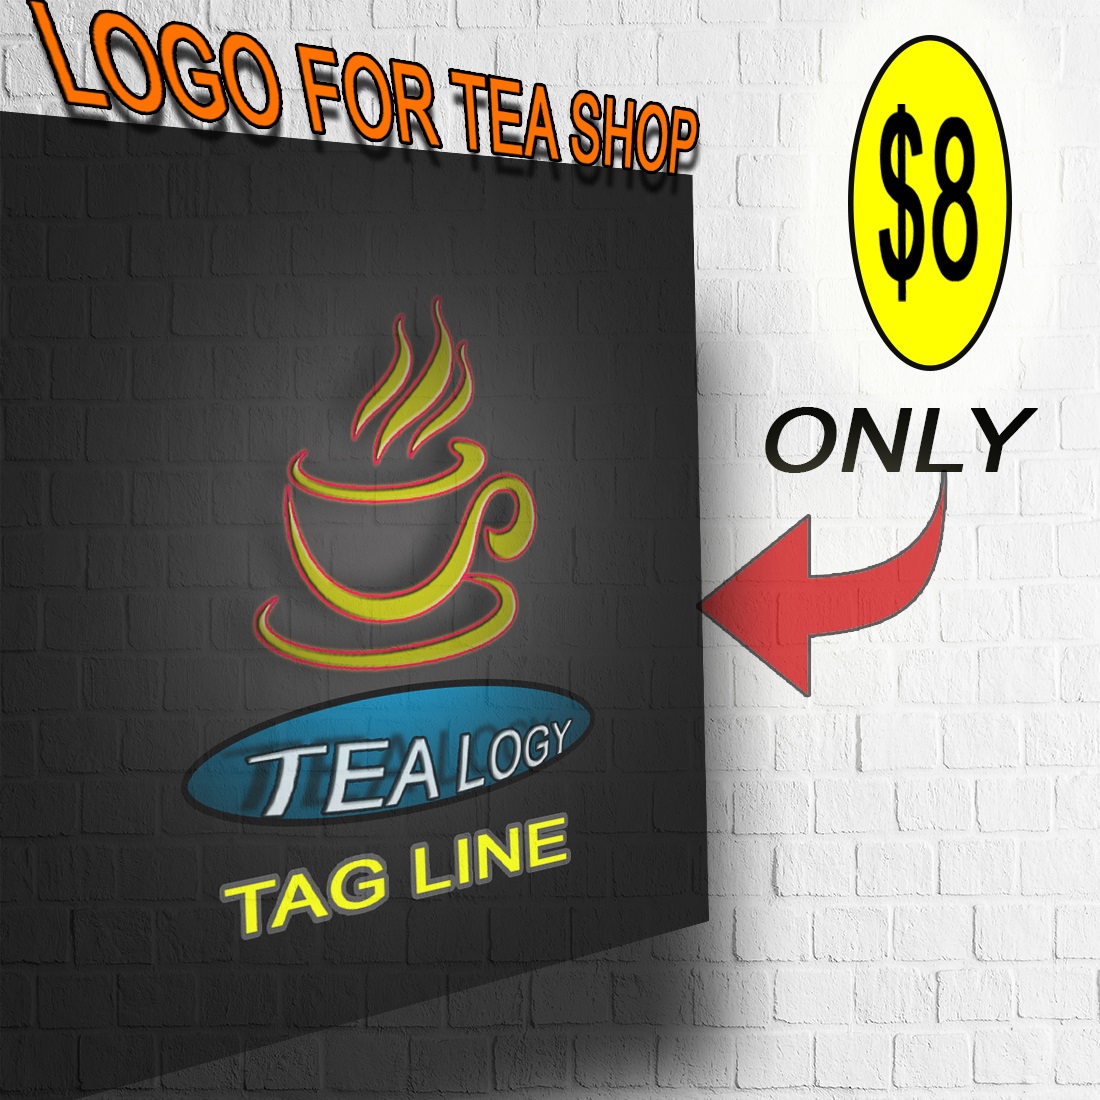 Tea cup logo for any tea logy or tea cafe cover image.